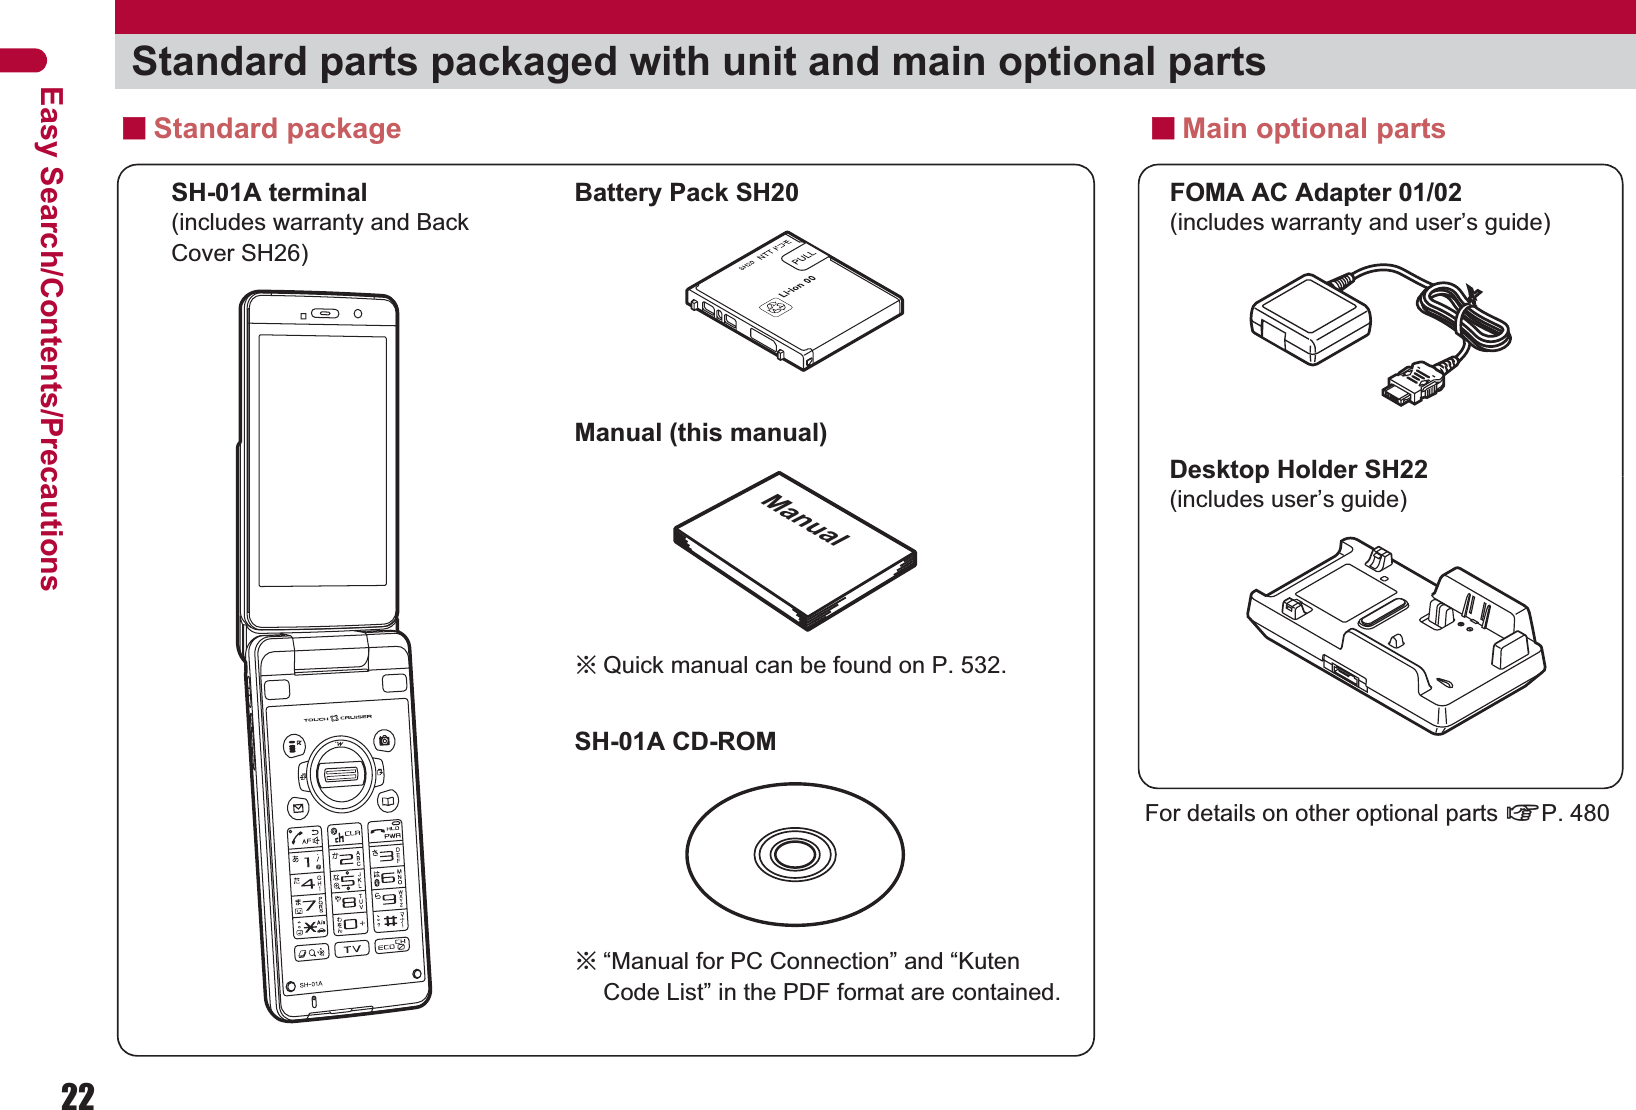 22Easy Search/Contents/PrecautionsStandard parts packaged with unit and main optional partsSH-01A terminal(includes warranty and Back Cover SH26)ɦ“Manual for PC Connection” and “Kuten Code List” in the PDF format are contained.ɡStandard packageFOMA AC Adapter 01/02(includes warranty and user’s guide)Desktop Holder SH22(includes user’s guide)Battery Pack SH20ɡMain optional partsManual (this manual)SH-01A CD-ROMFor details on other optional parts nP. 480ManualɦQuick manual can be found on P. 532.